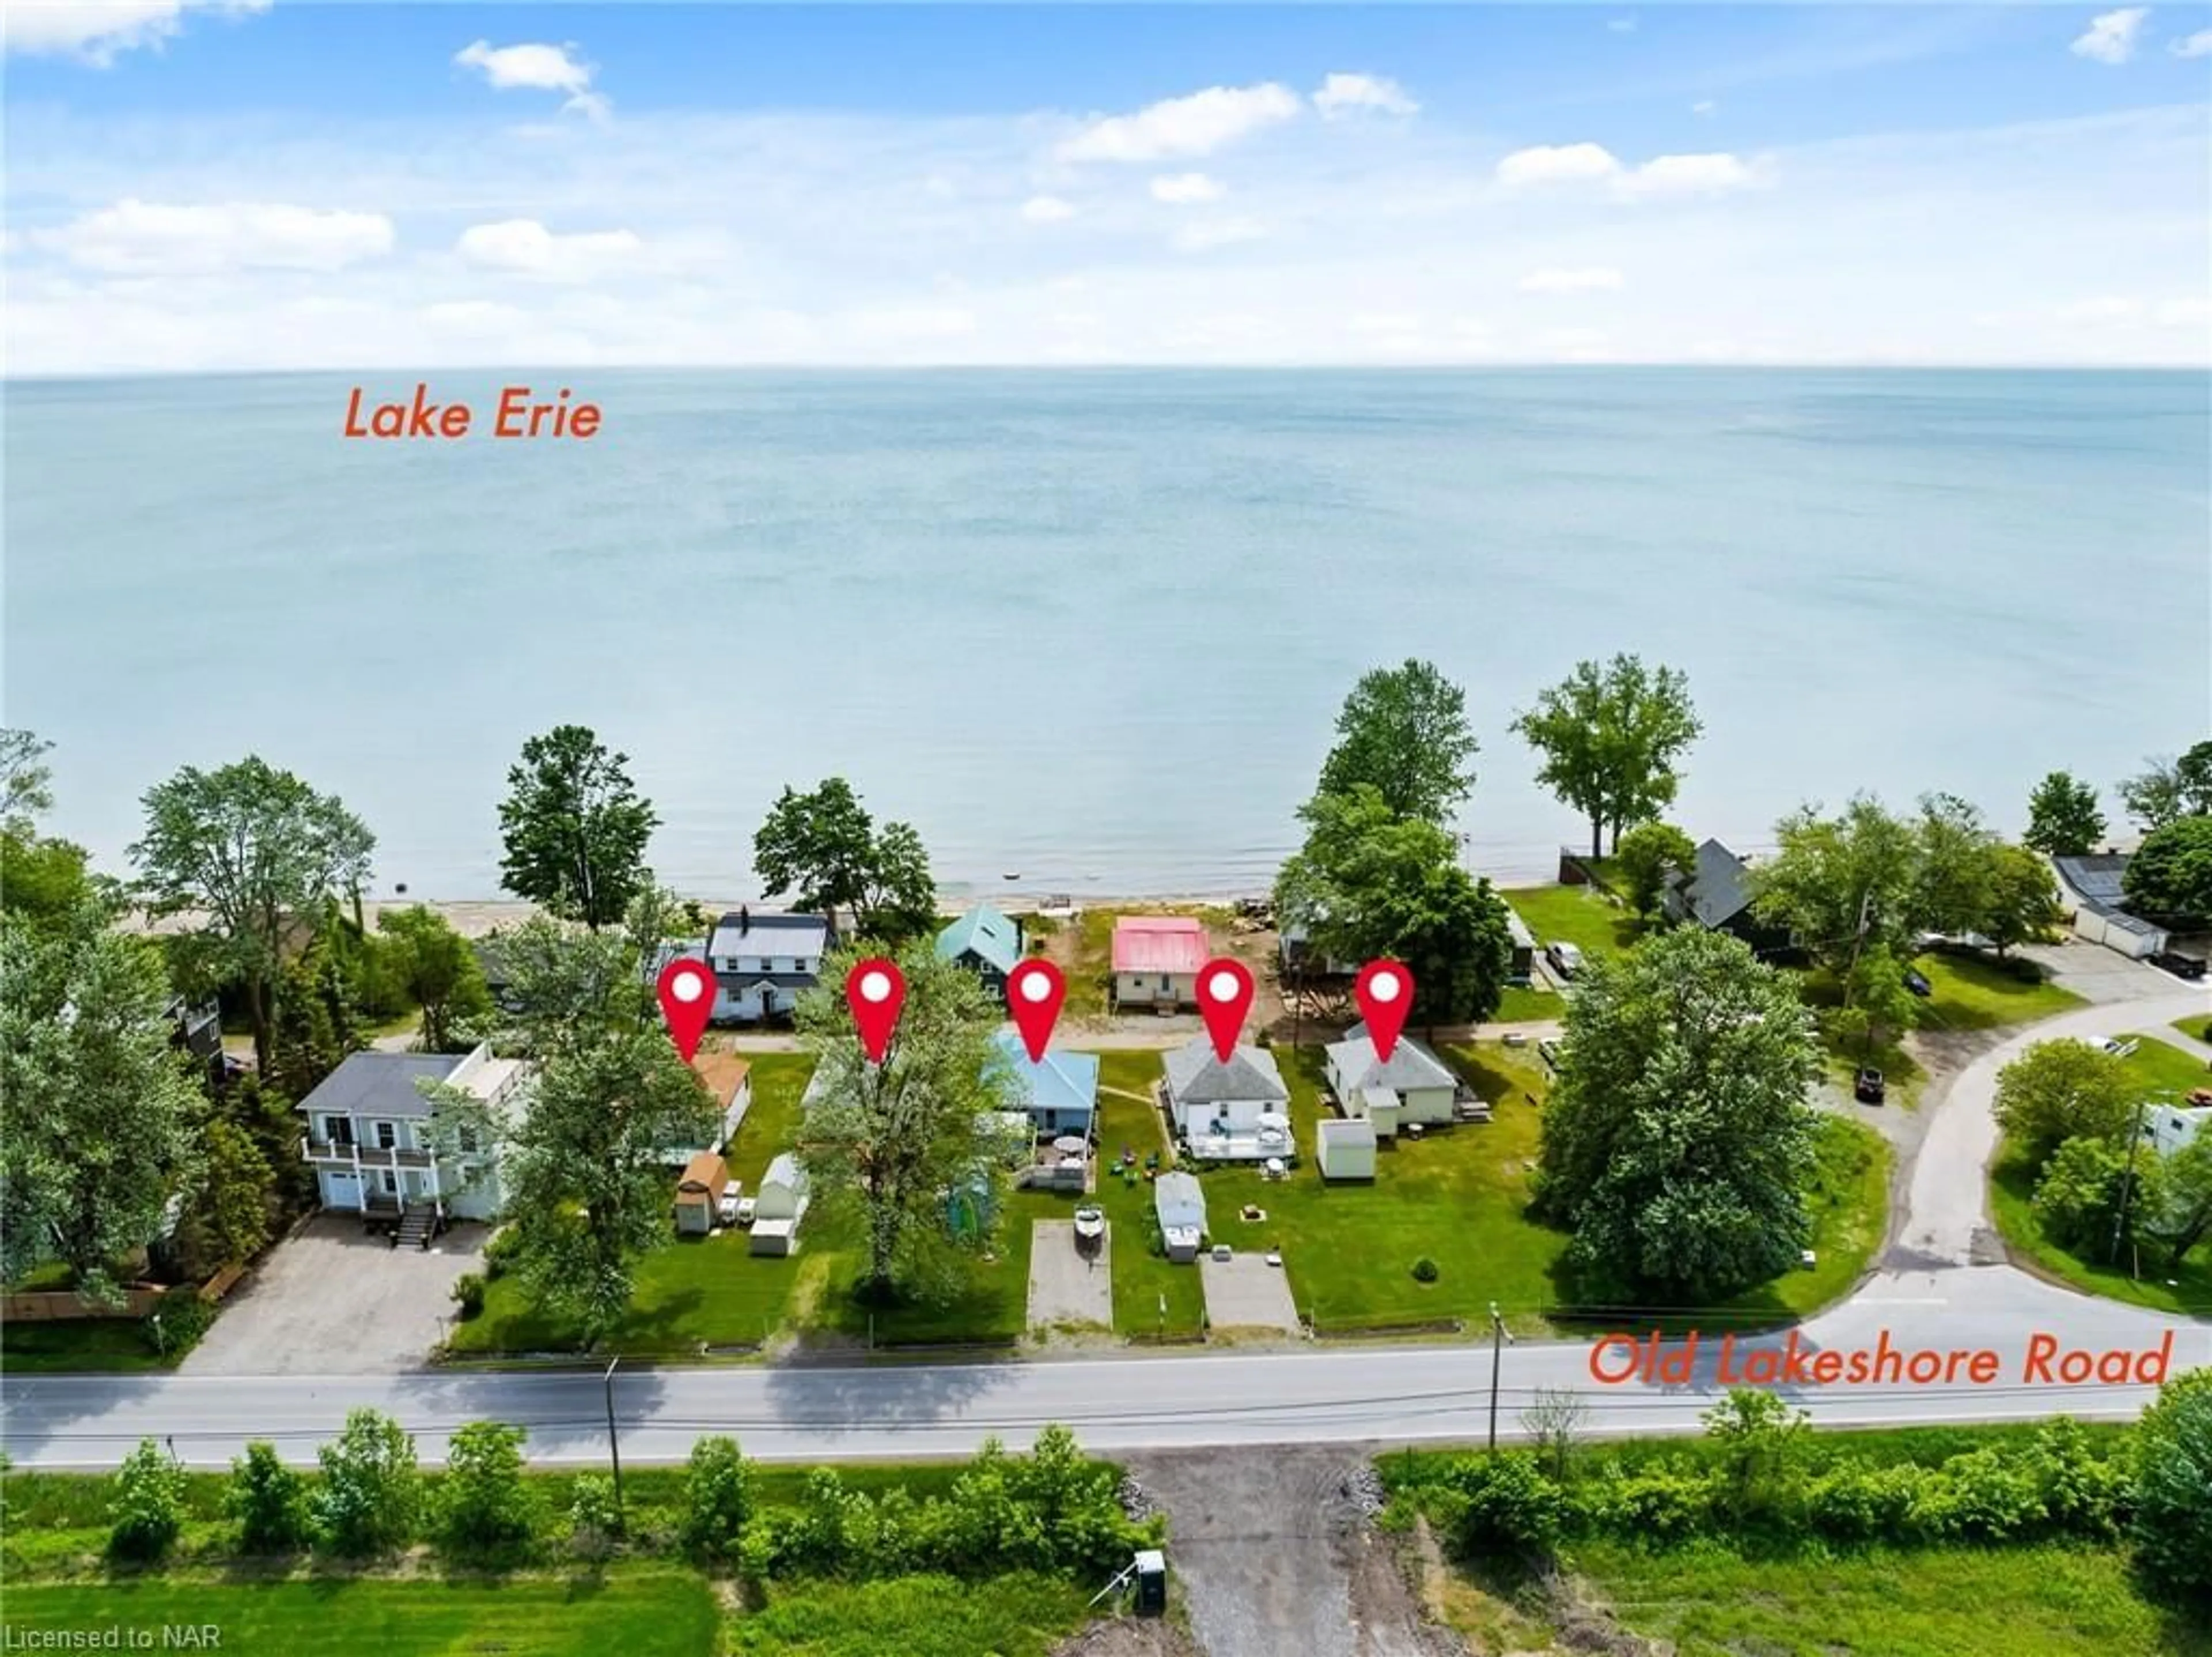 Lakeview for 12807-12815 Lakeshore Rd, Wainfleet Ontario L0S 1V0